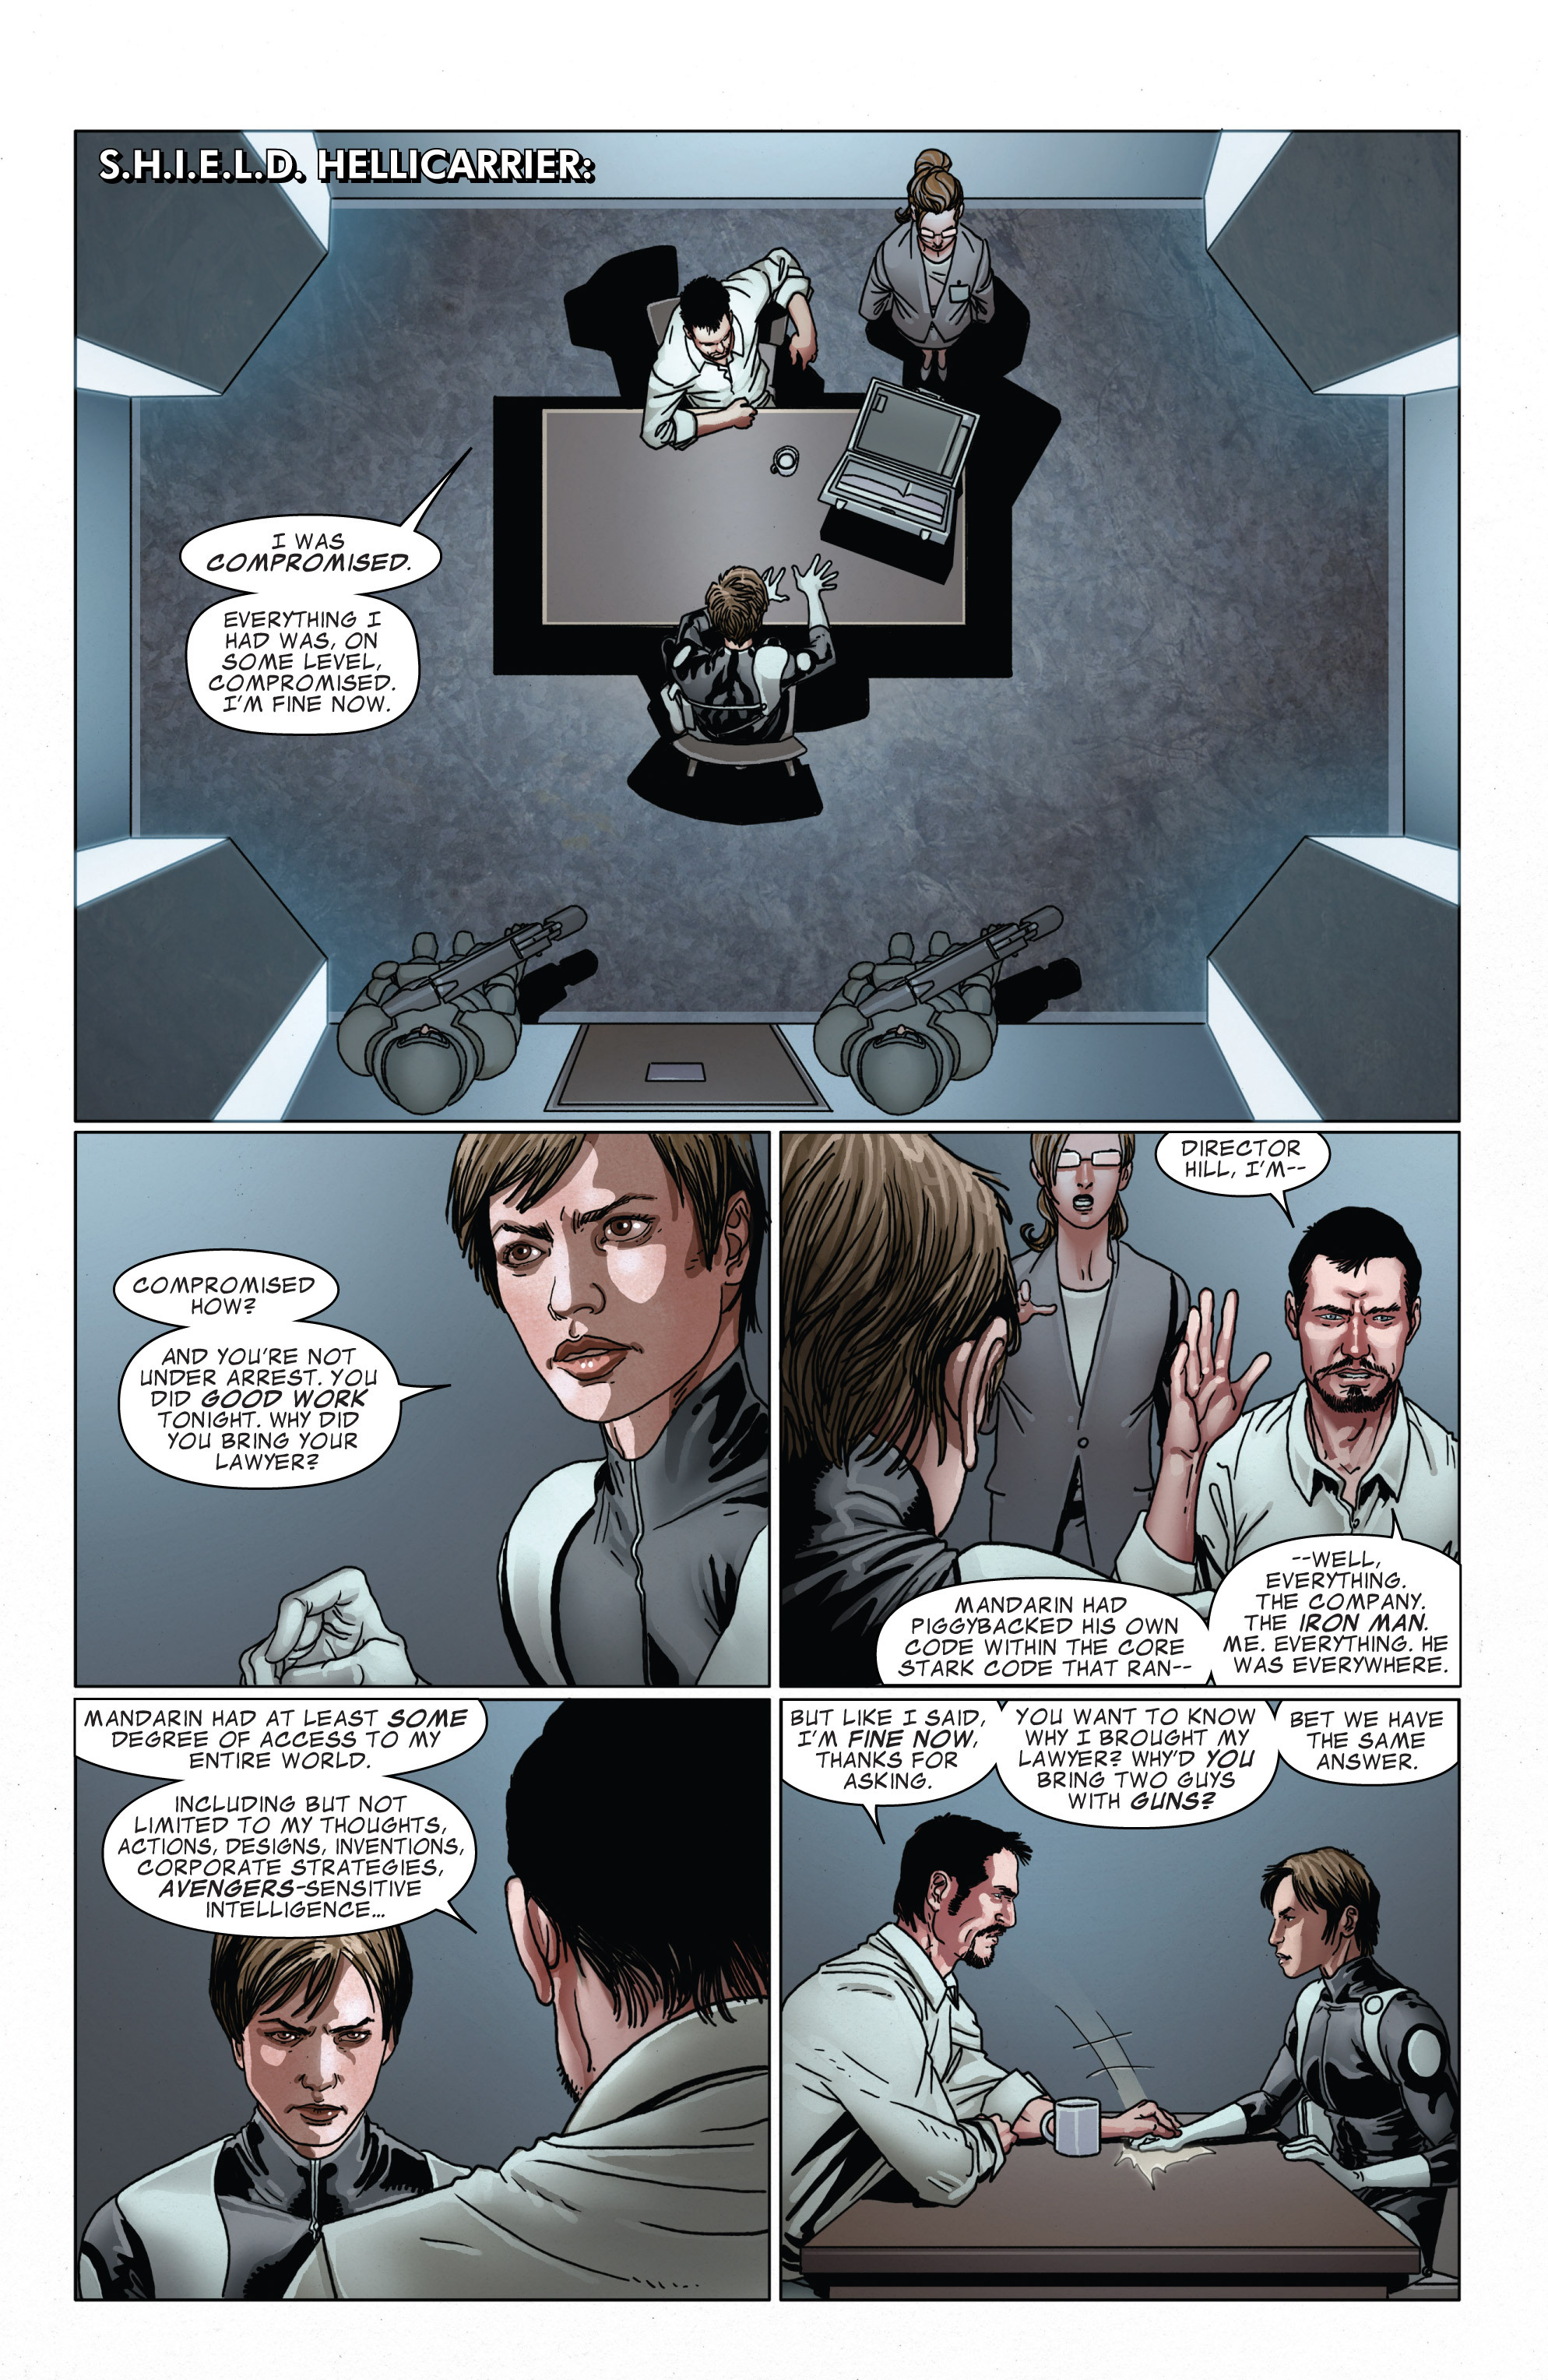 Invincible Iron Man (2008) 527 Page 6